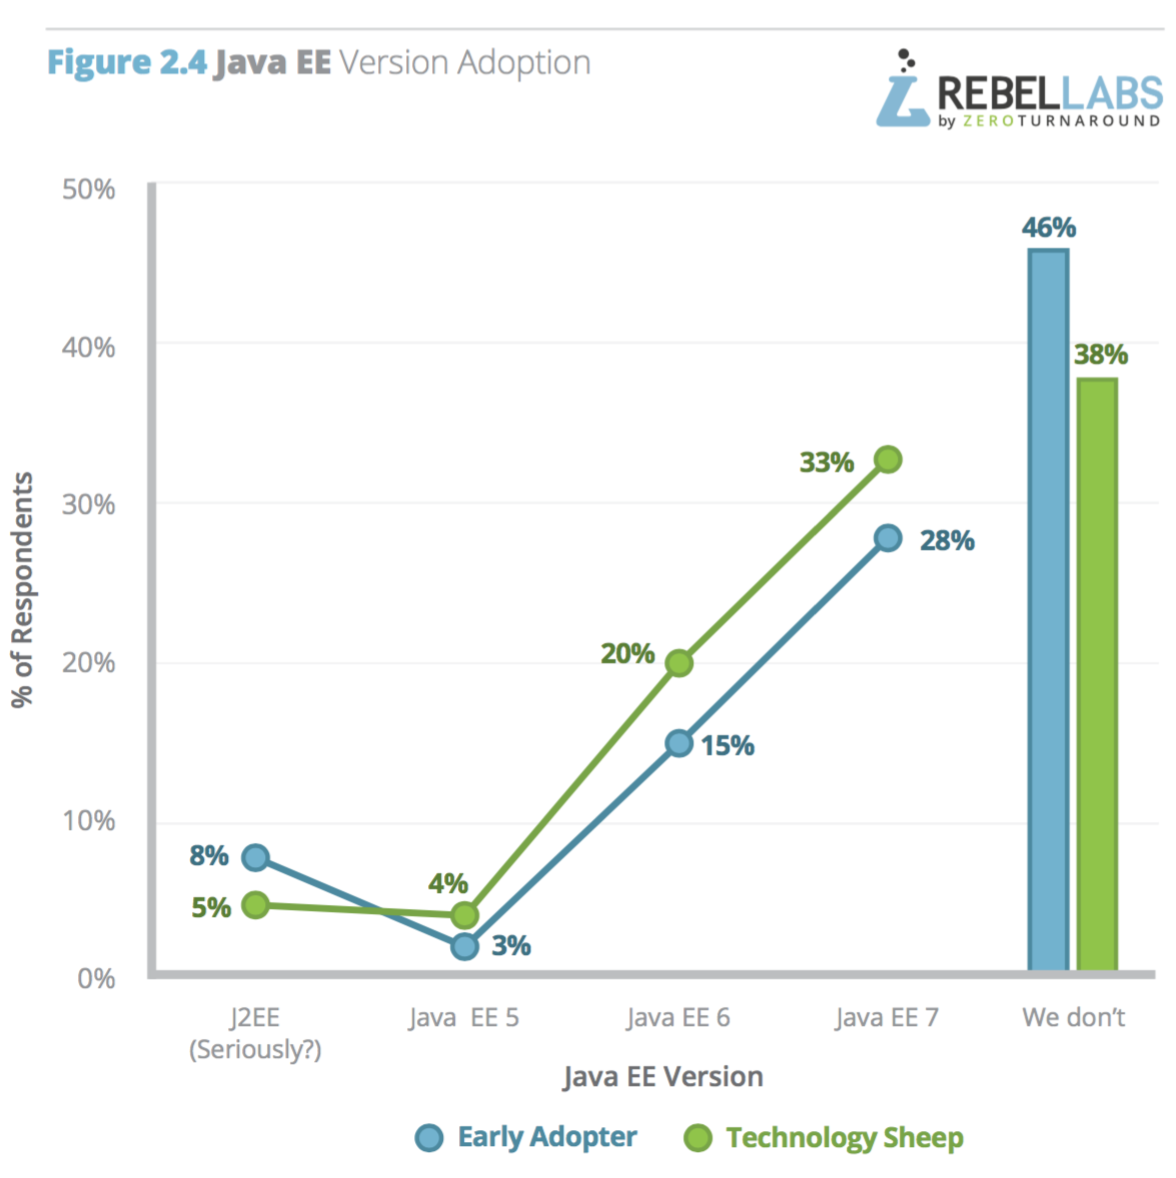 graph showing percentage of early adopters vs sheep by JavaEE version